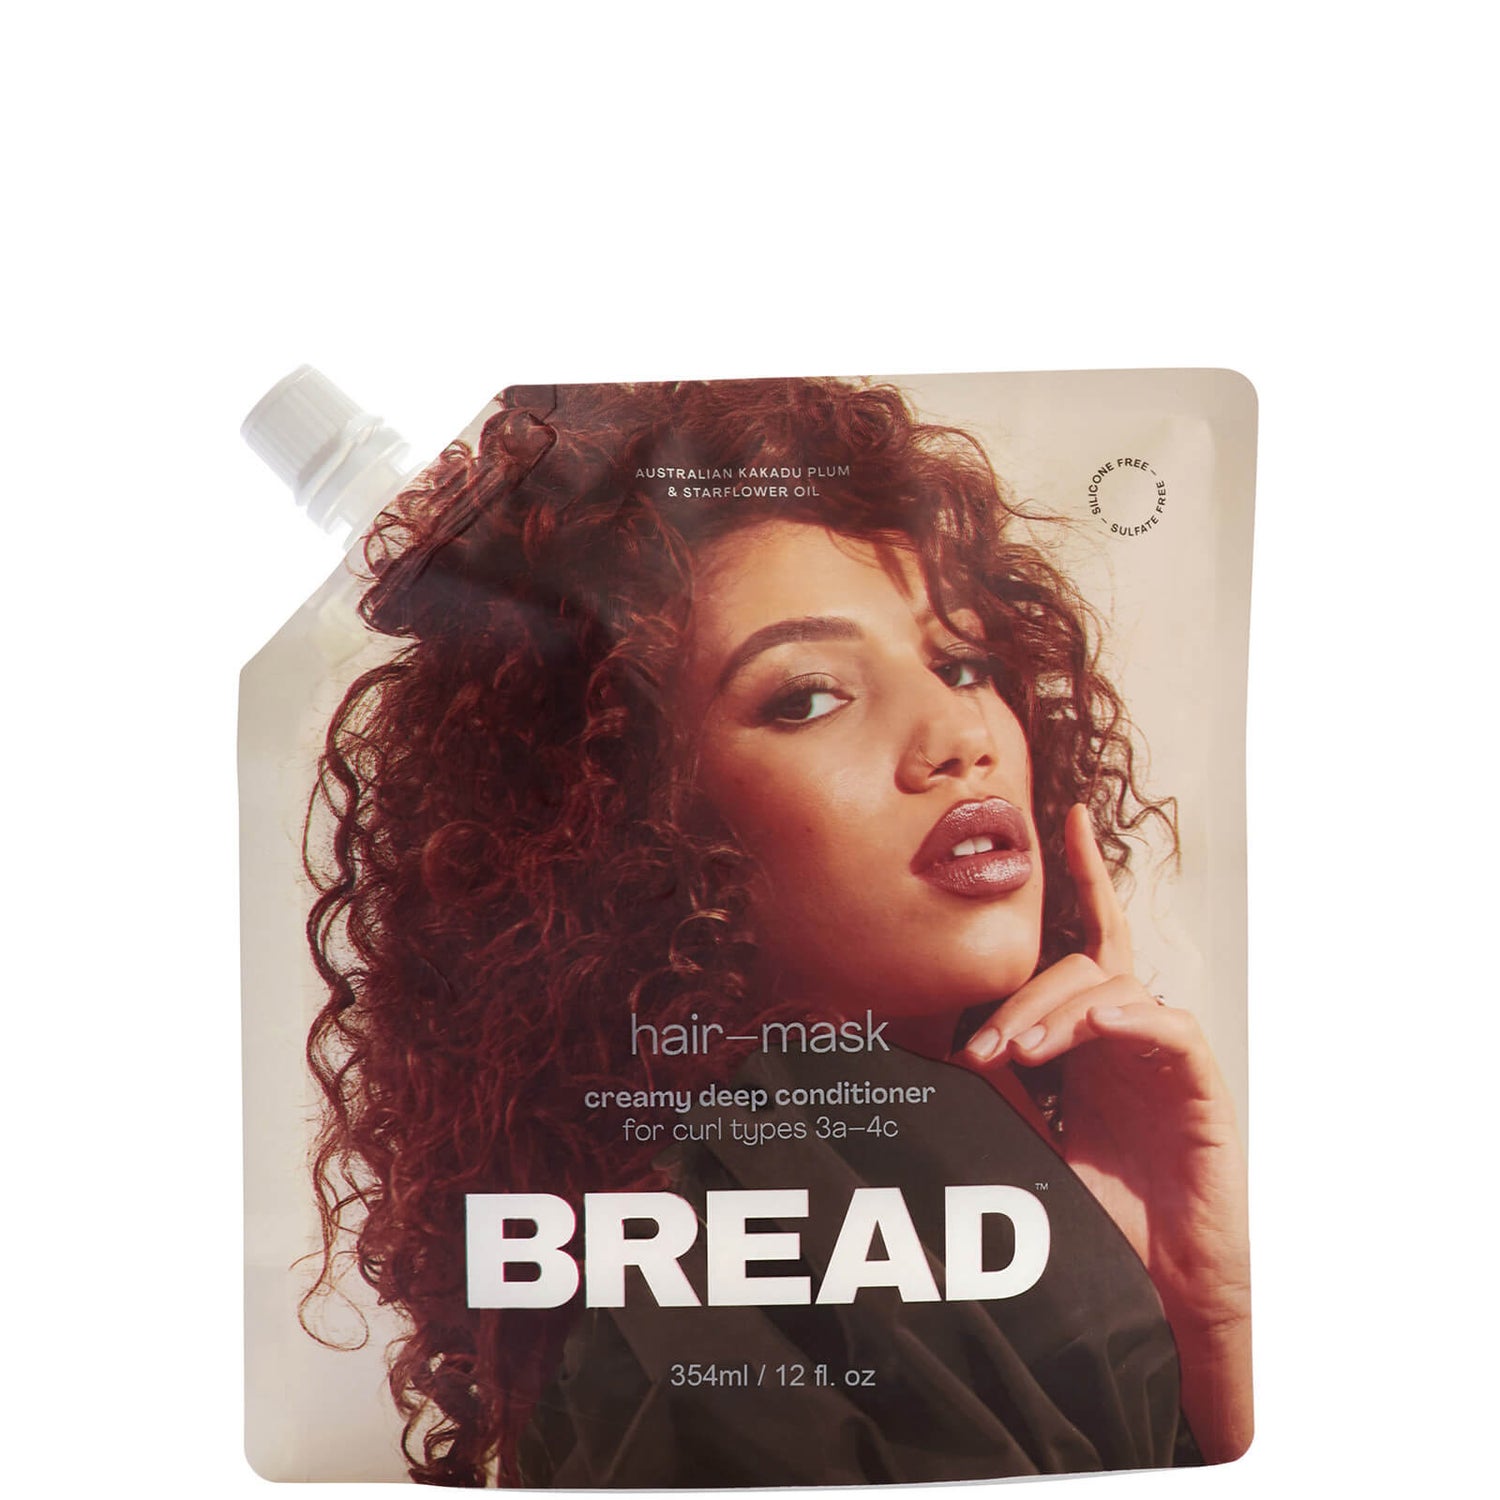 BREAD BEAUTY SUPPLY hair-mask: creamy deep conditioner | Cult Beauty